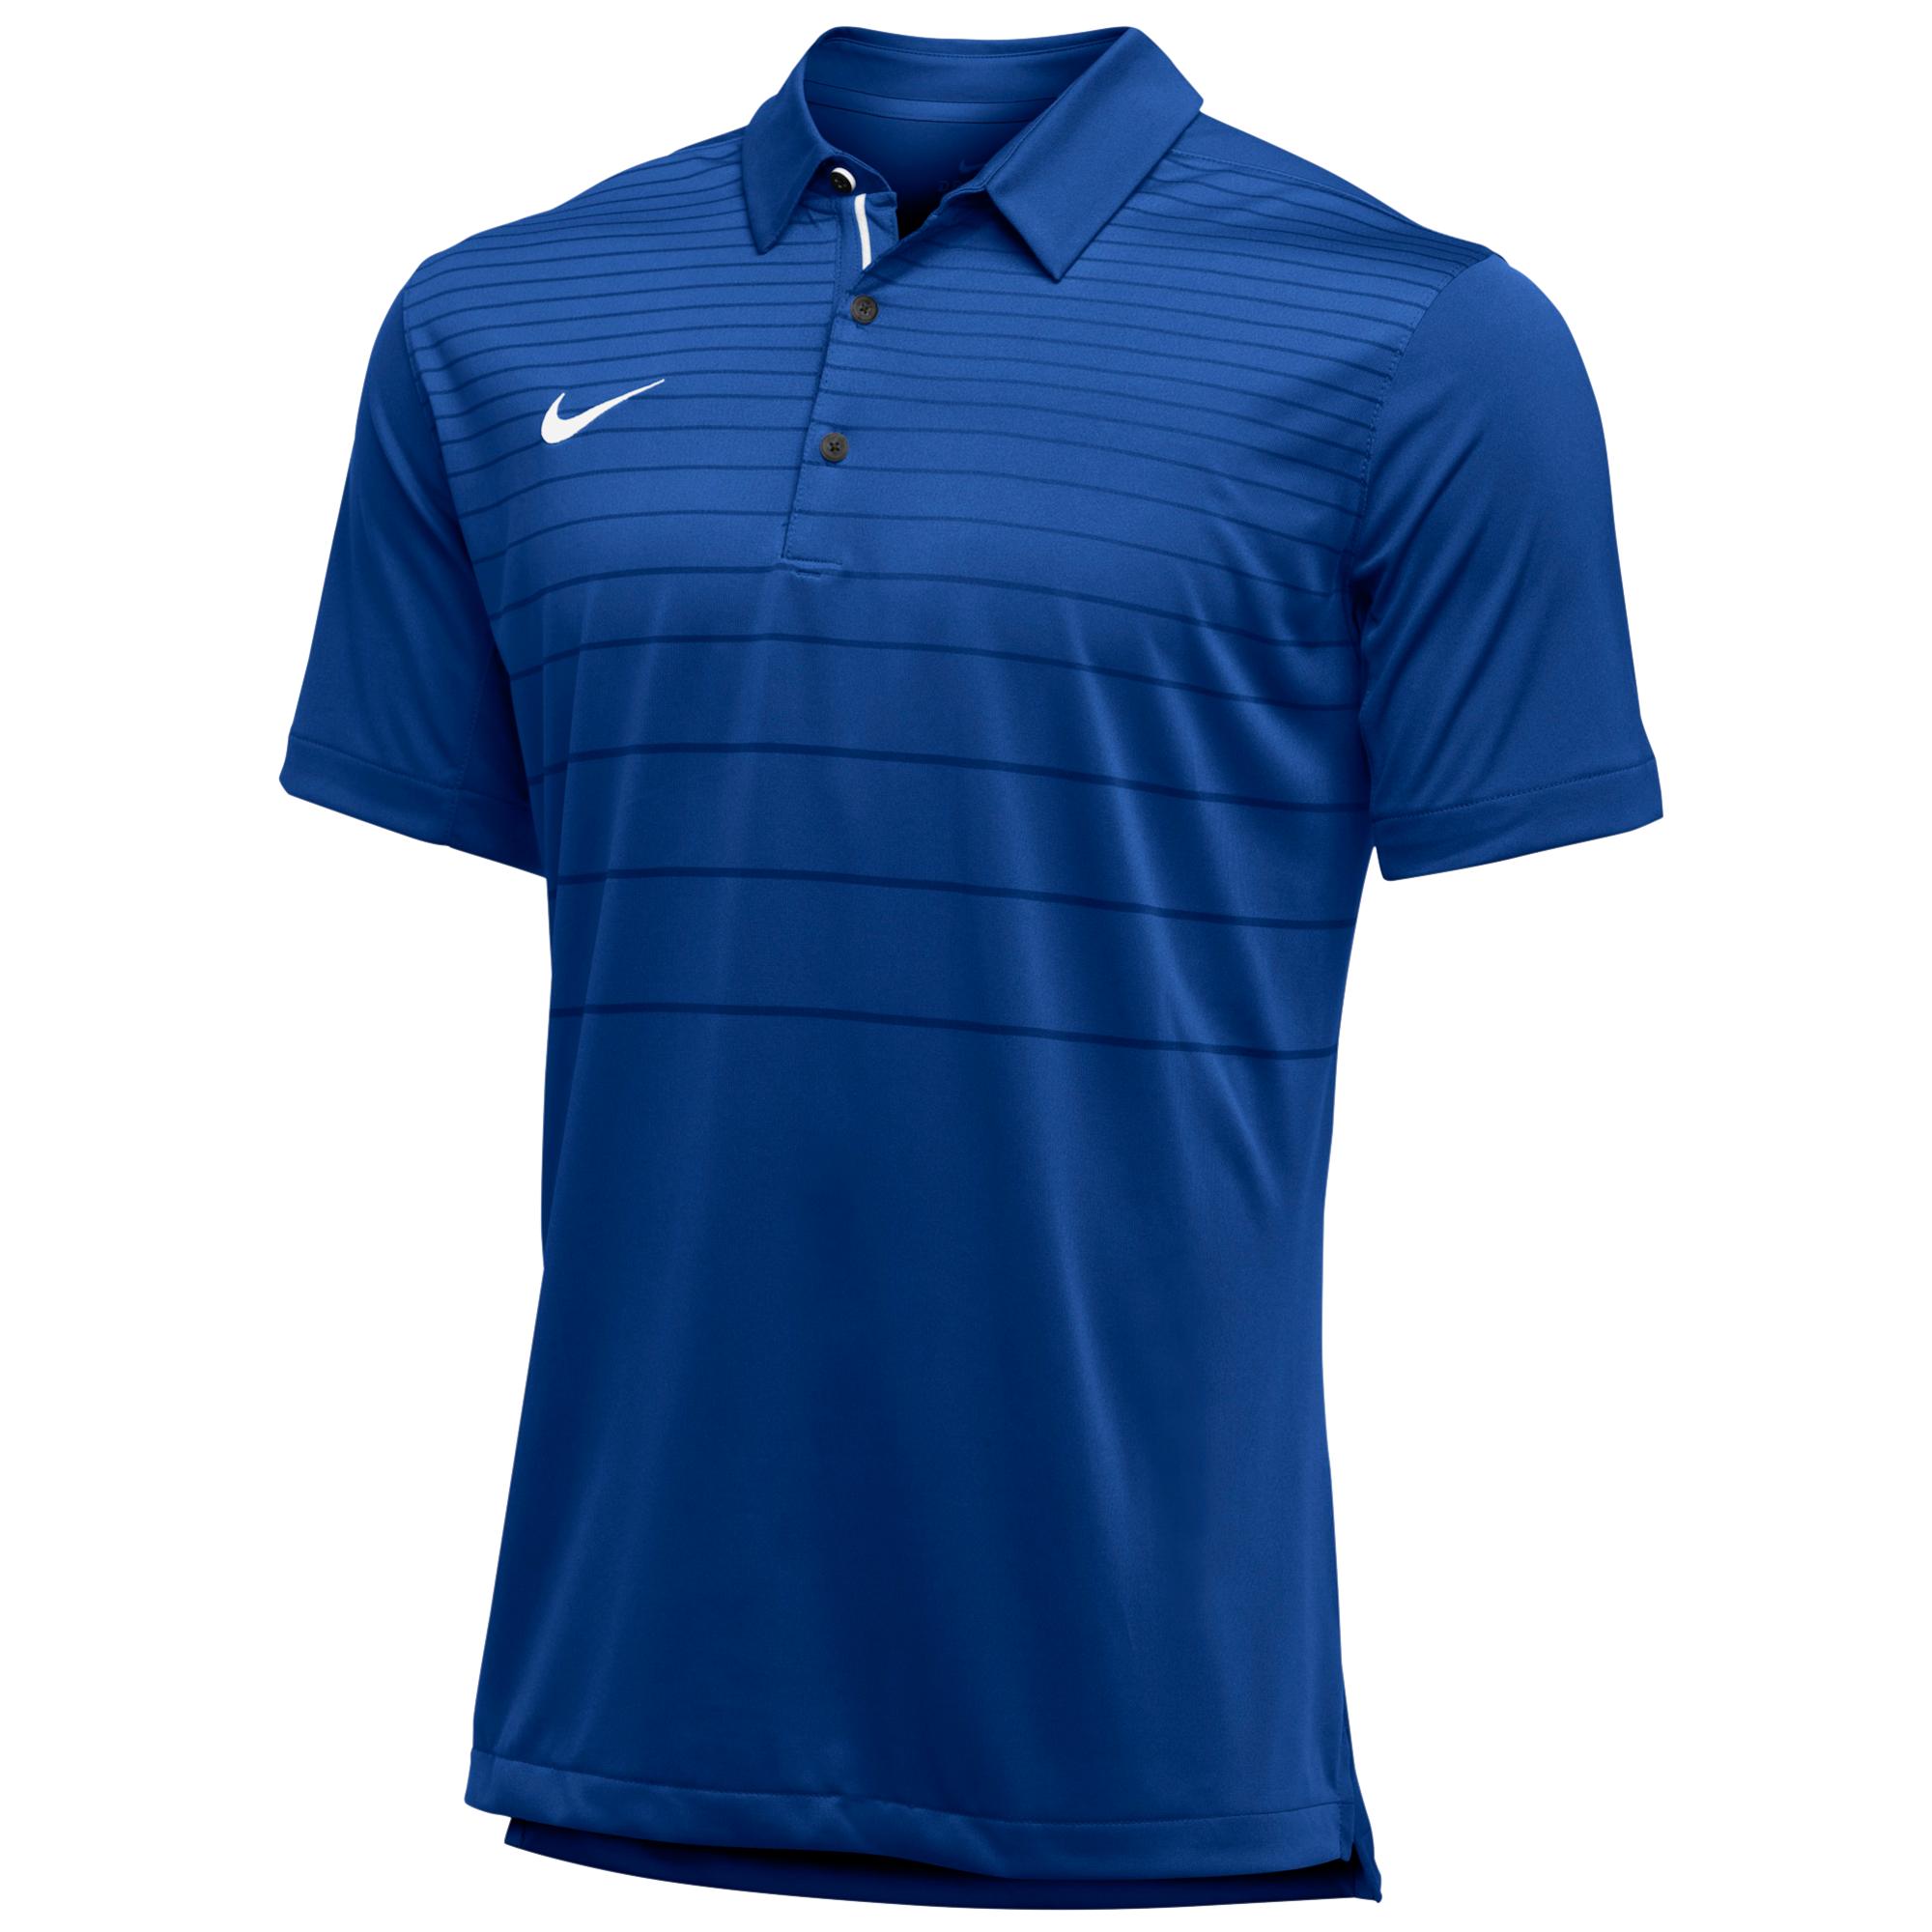 Nike Synthetic Team Early Season Polo Shirt in Blue for Men - Lyst